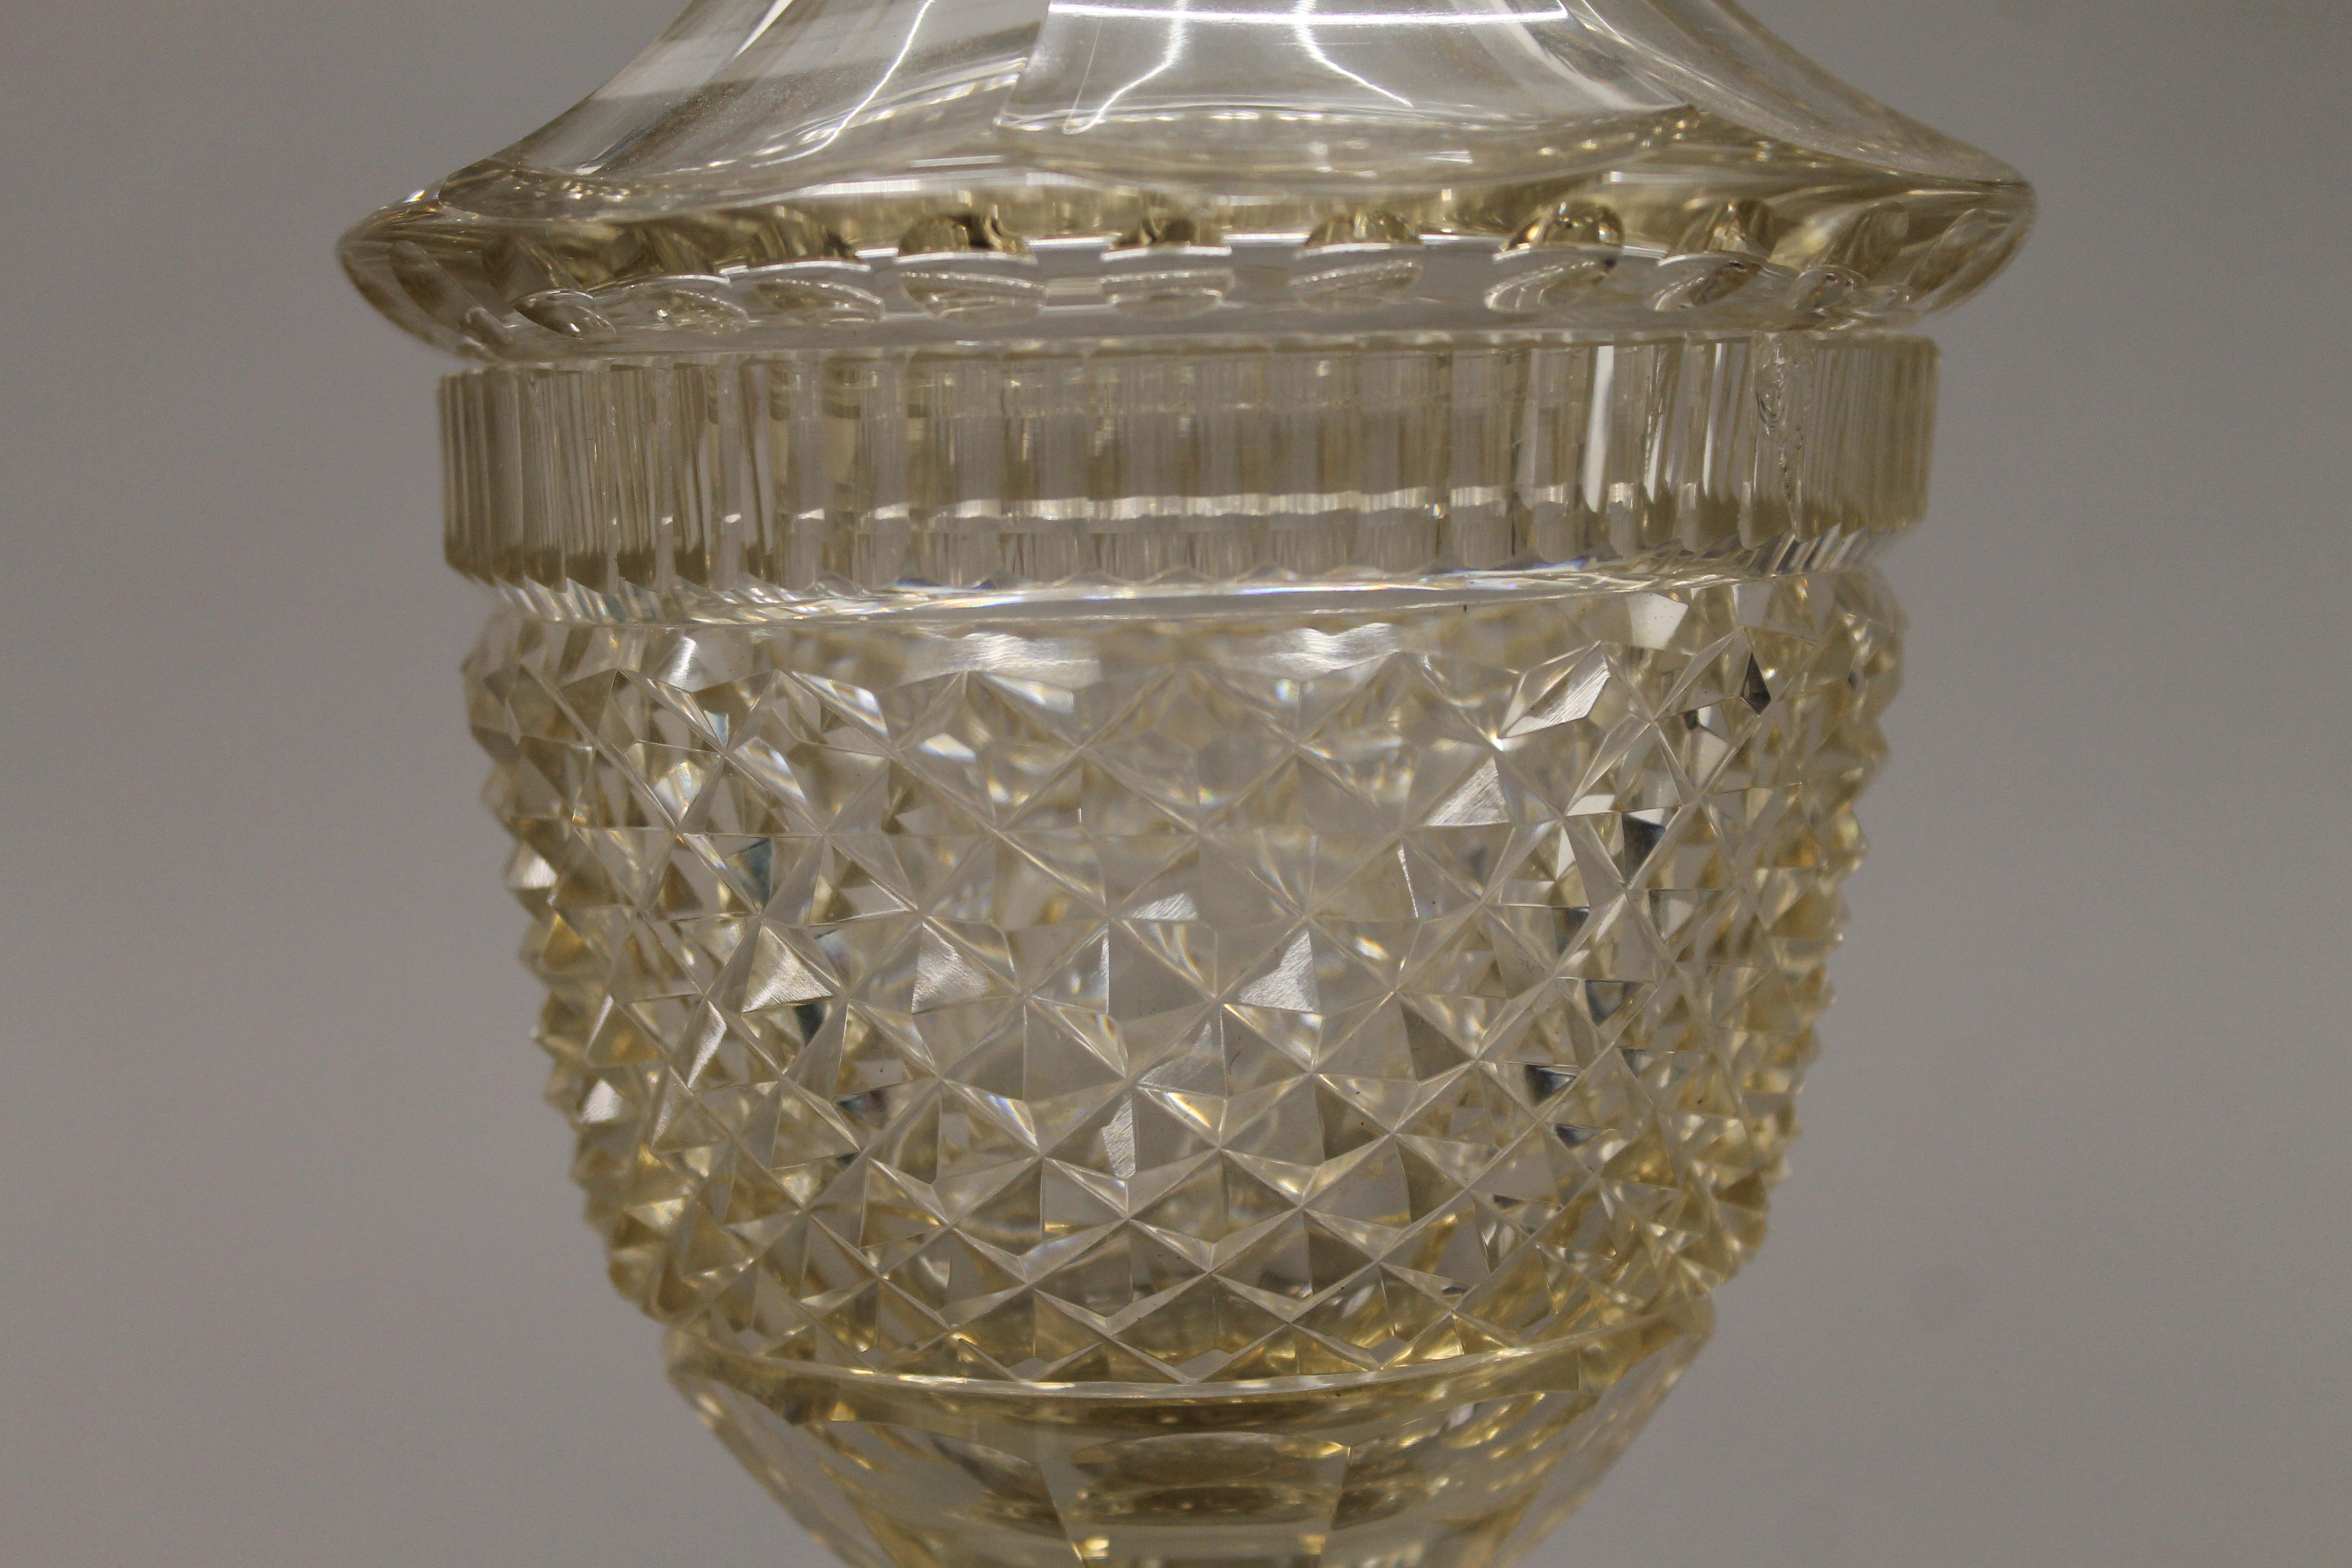 A pair of 19th century cut glass lidded vases, possibly Irish. 31 cm high. - Image 5 of 6